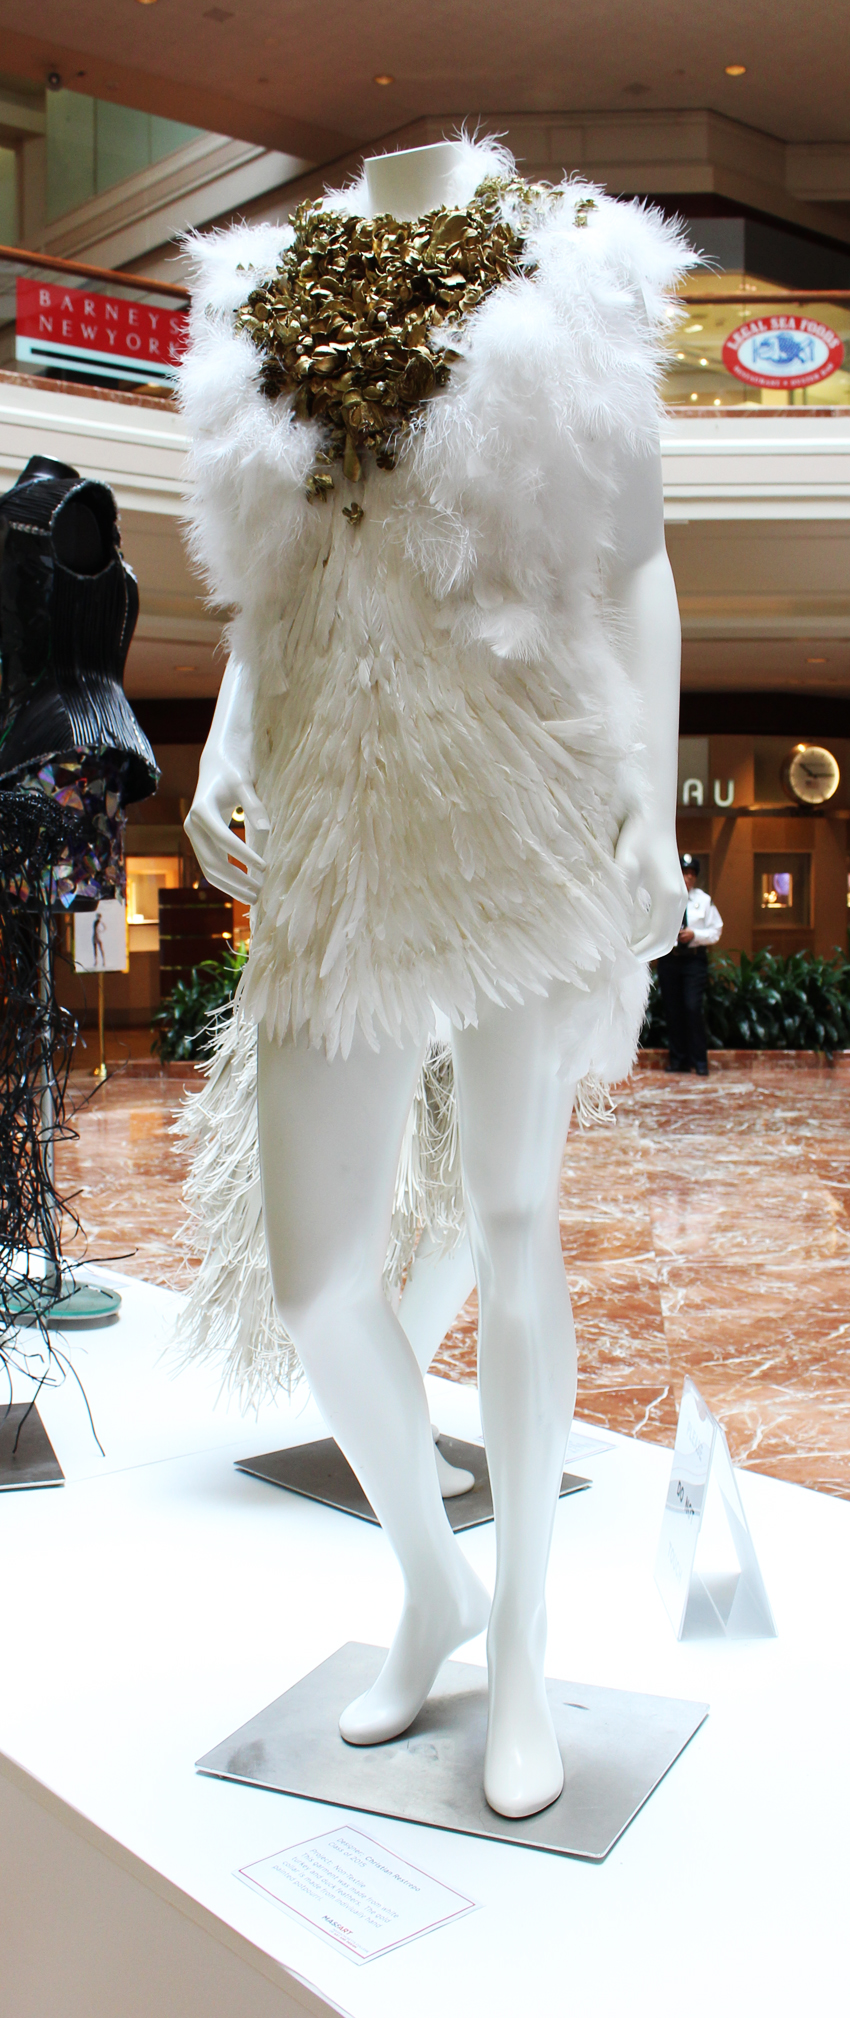 Christian Restrepo's piece made of feathers and painted potpourri wowed at the fashion show when it was modeled by a man.